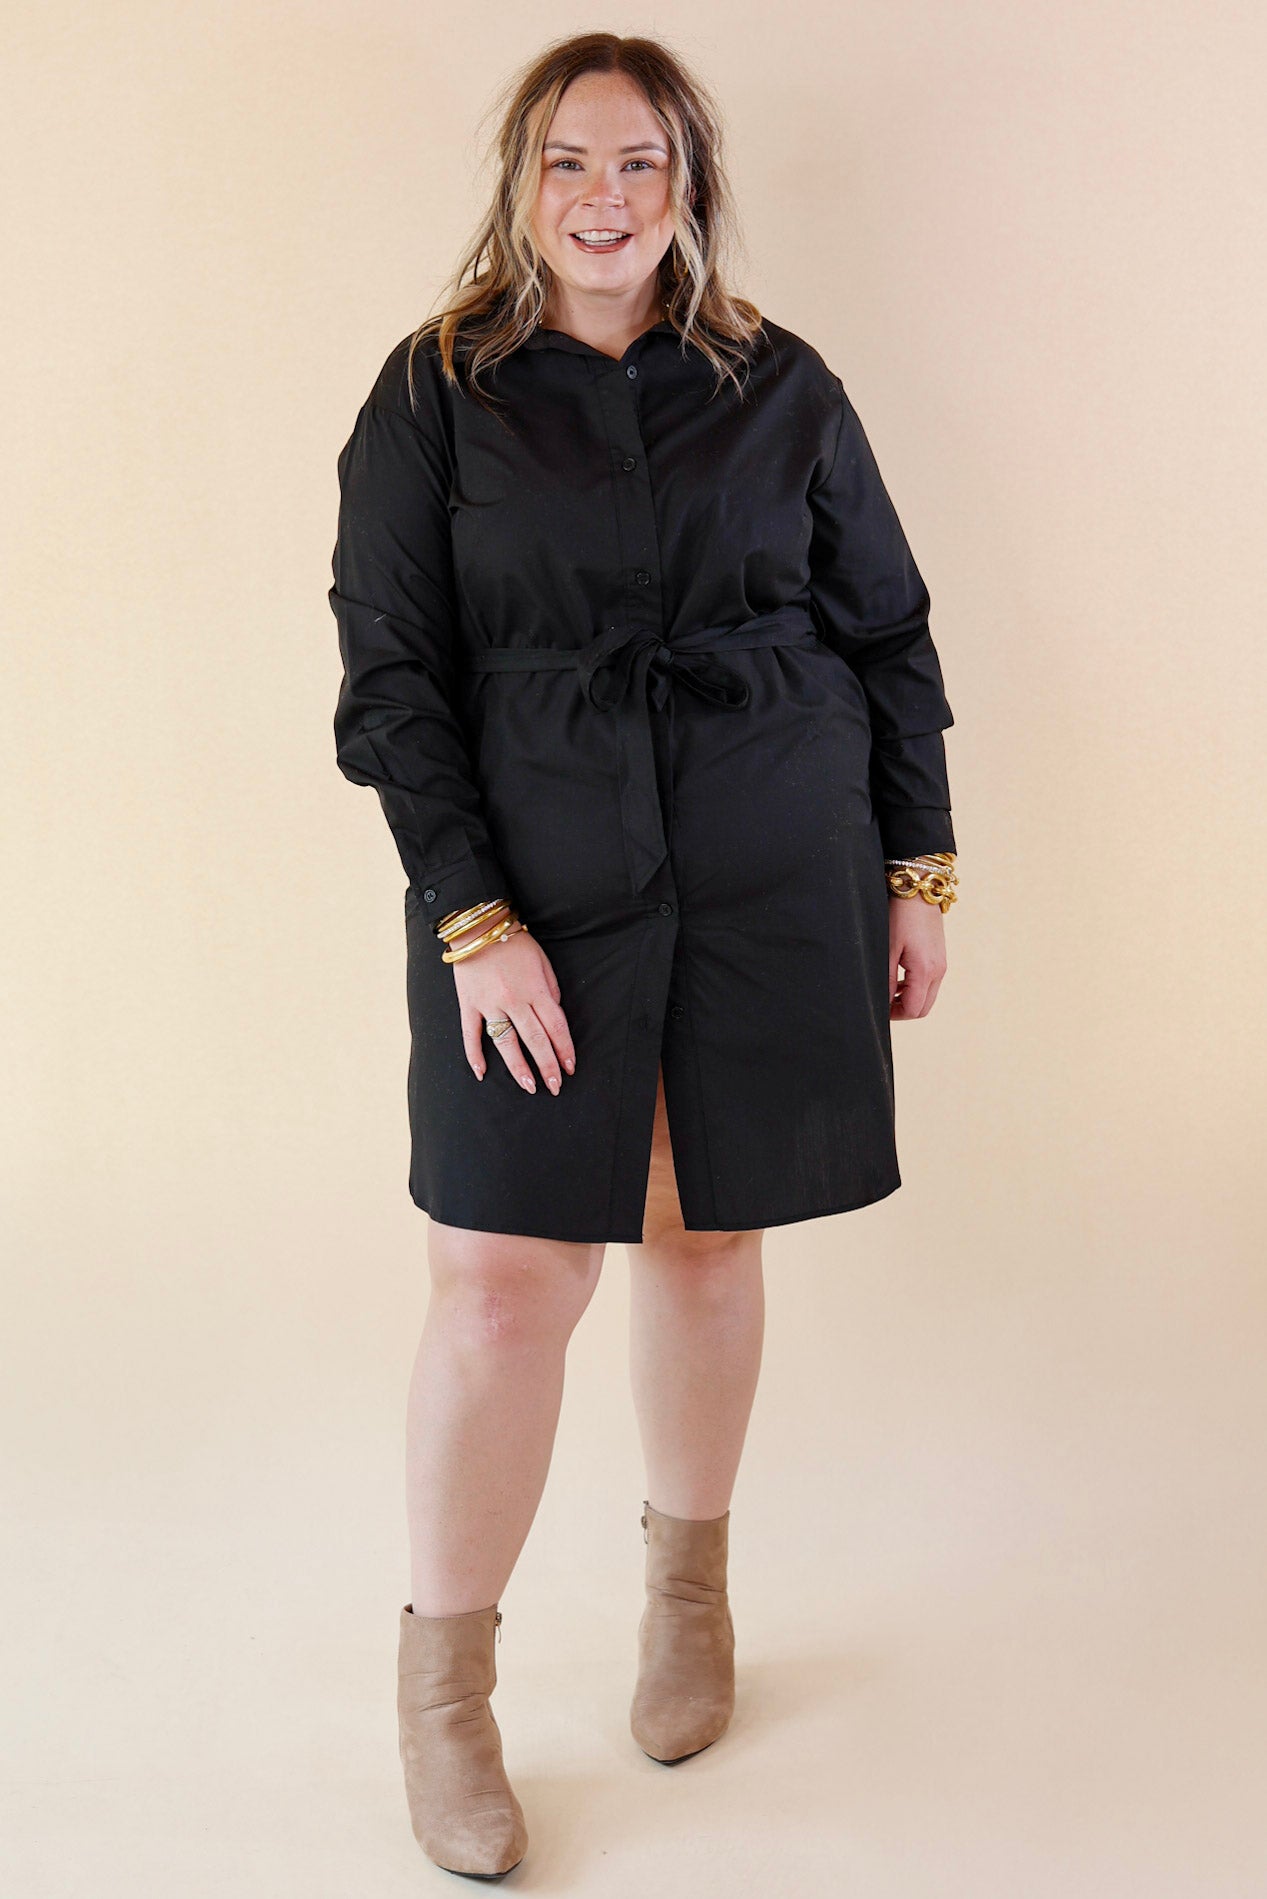 Keeps Getting Better Button Up Dress with Collared Neckline in Black - Giddy Up Glamour Boutique